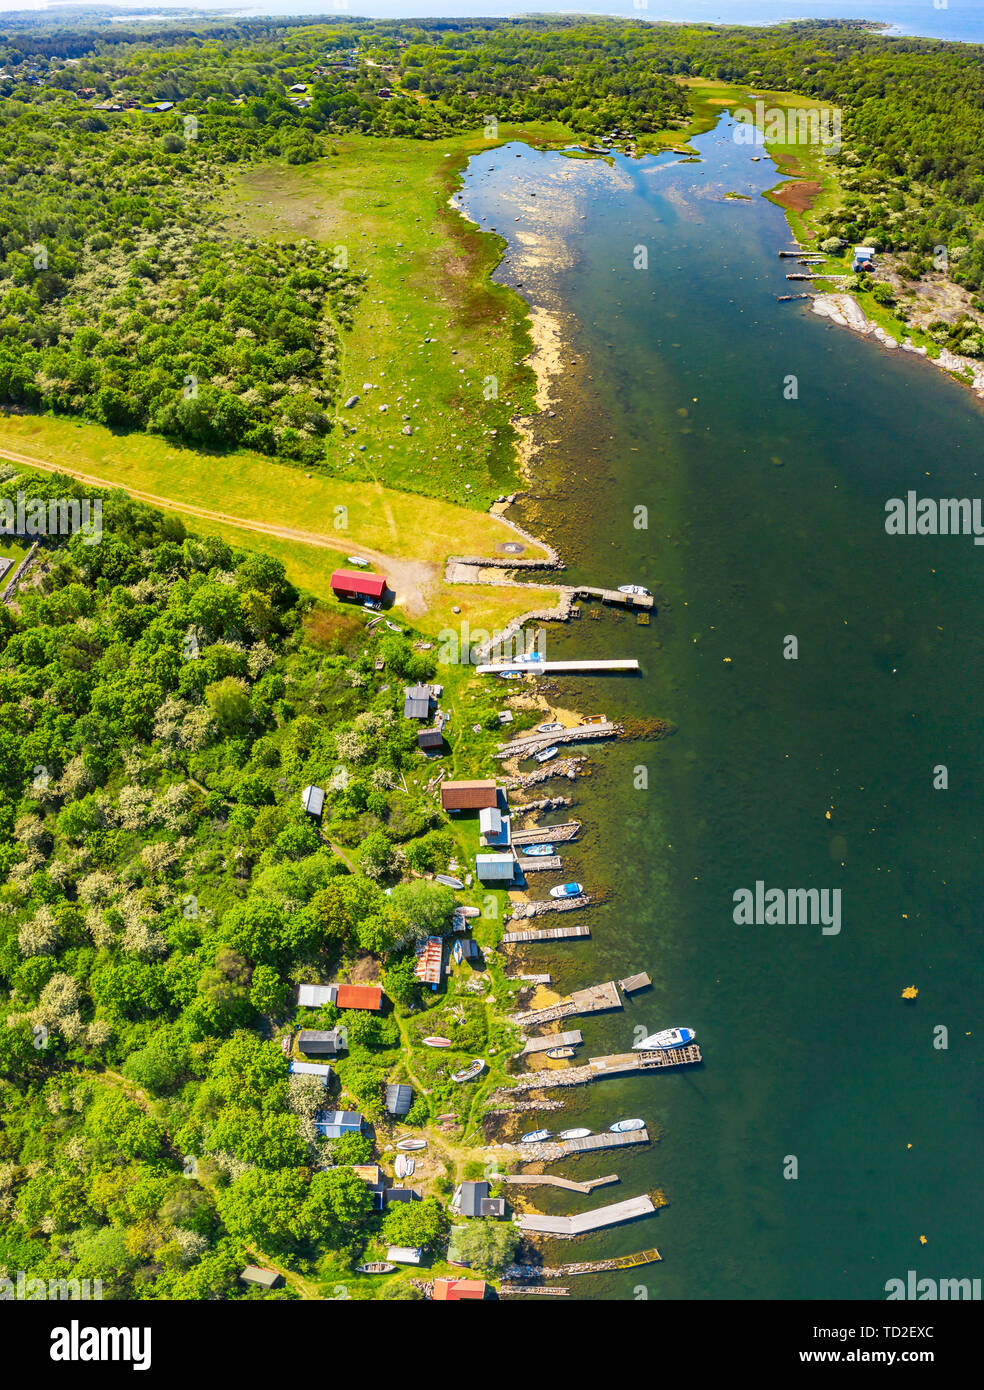 Aerial of coastal landscape with row of jetties lining the shore of a bay. Location Hasslo island in Blekinge archipelago, Sweden. Stock Photo